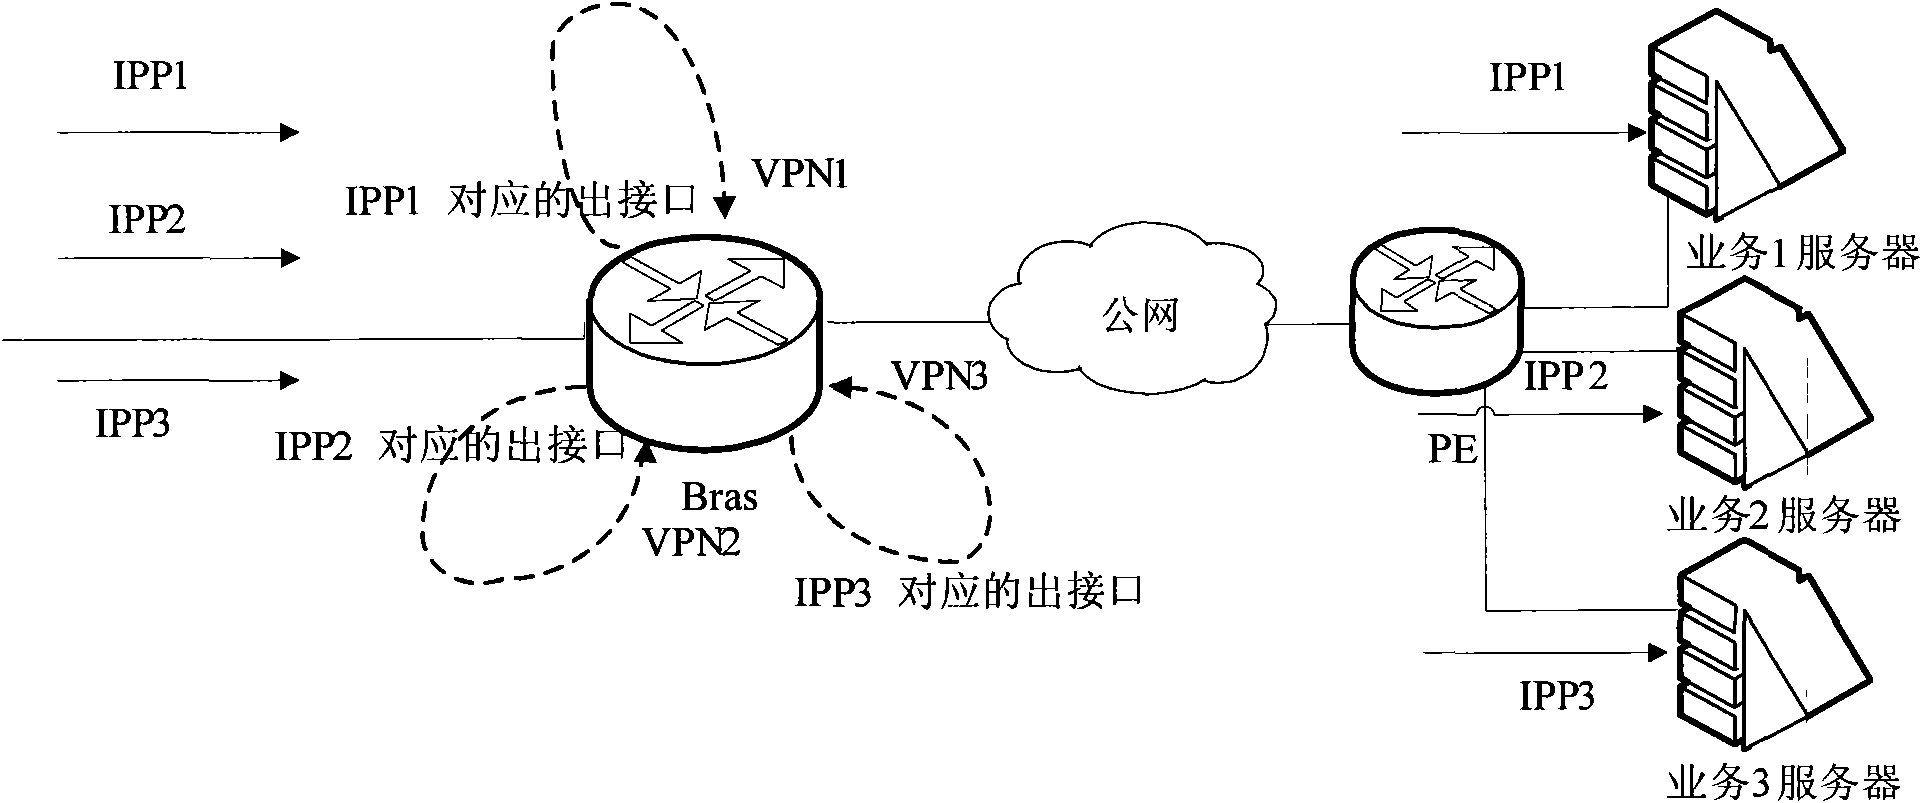 Method and system for classifying service flow